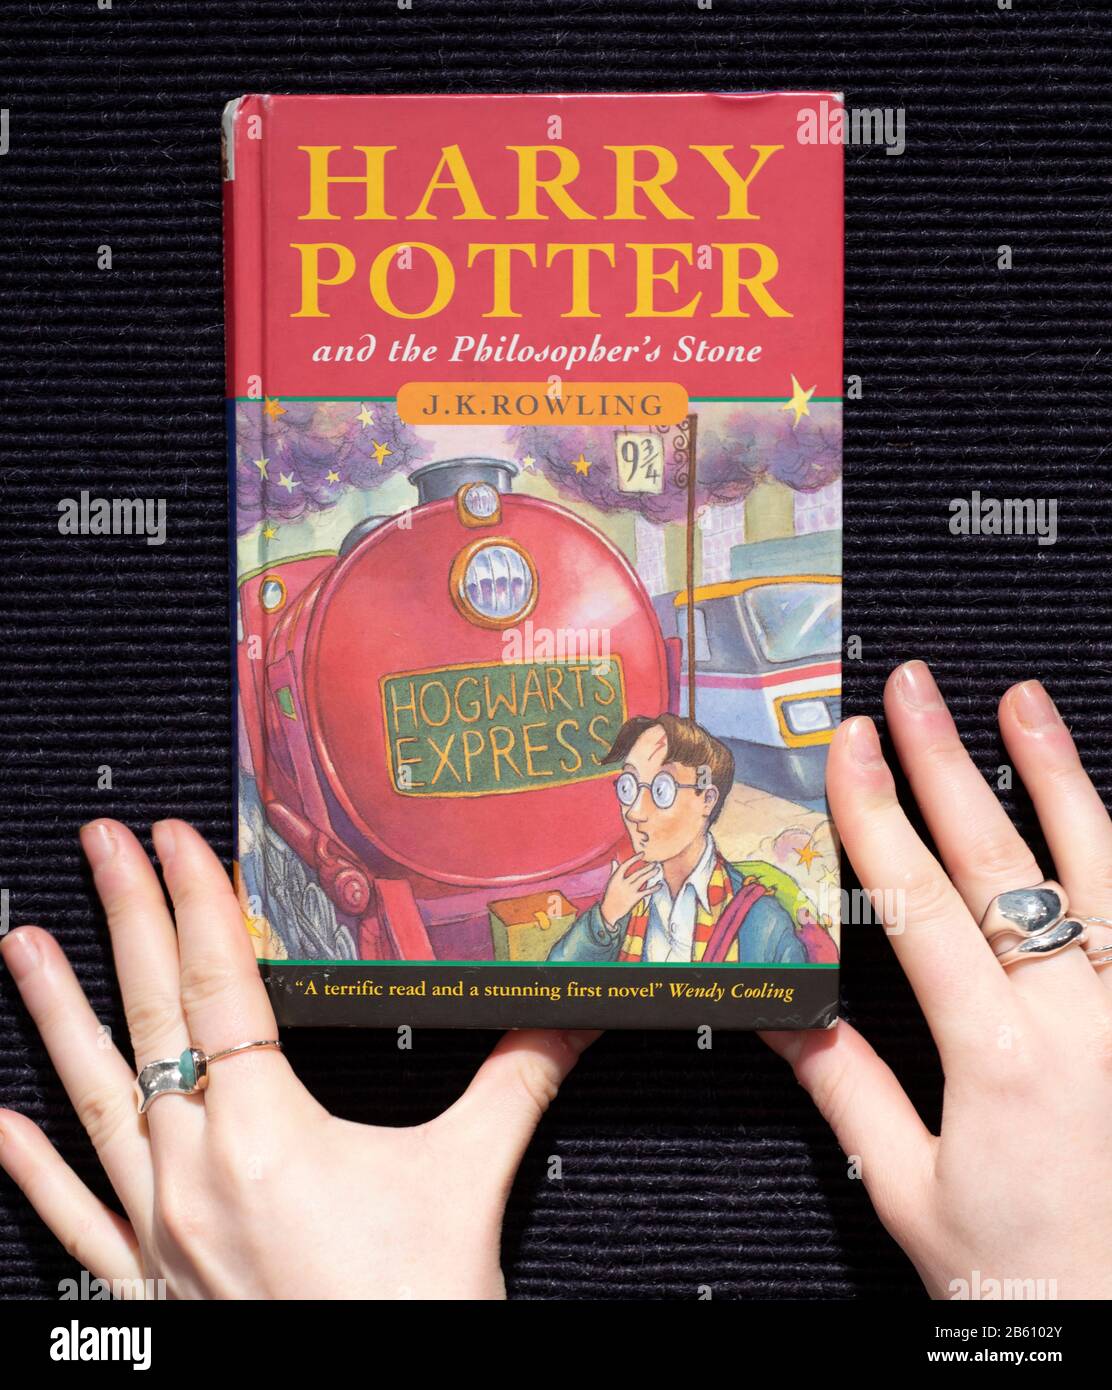 Bonhams, London, UK. 9th March 2020. Fine Books, Atlases, Manuscripts & Historical Photographs on preview prior to the sale in London on 11 March 2020. Image: J.K. Rowling. Harry Potter and the Philosopher's Stone, First Edition, First Impression, inscribed by the Author 'to Bryony... the first person ever to see merit in Harry Potter. With huge [underlined 4 times] thanks. J.K. Rowling', Bloomsbury, 1997, estimate £70,000-90,000. Credit: Malcolm Park/Alamy Live News. Stock Photo